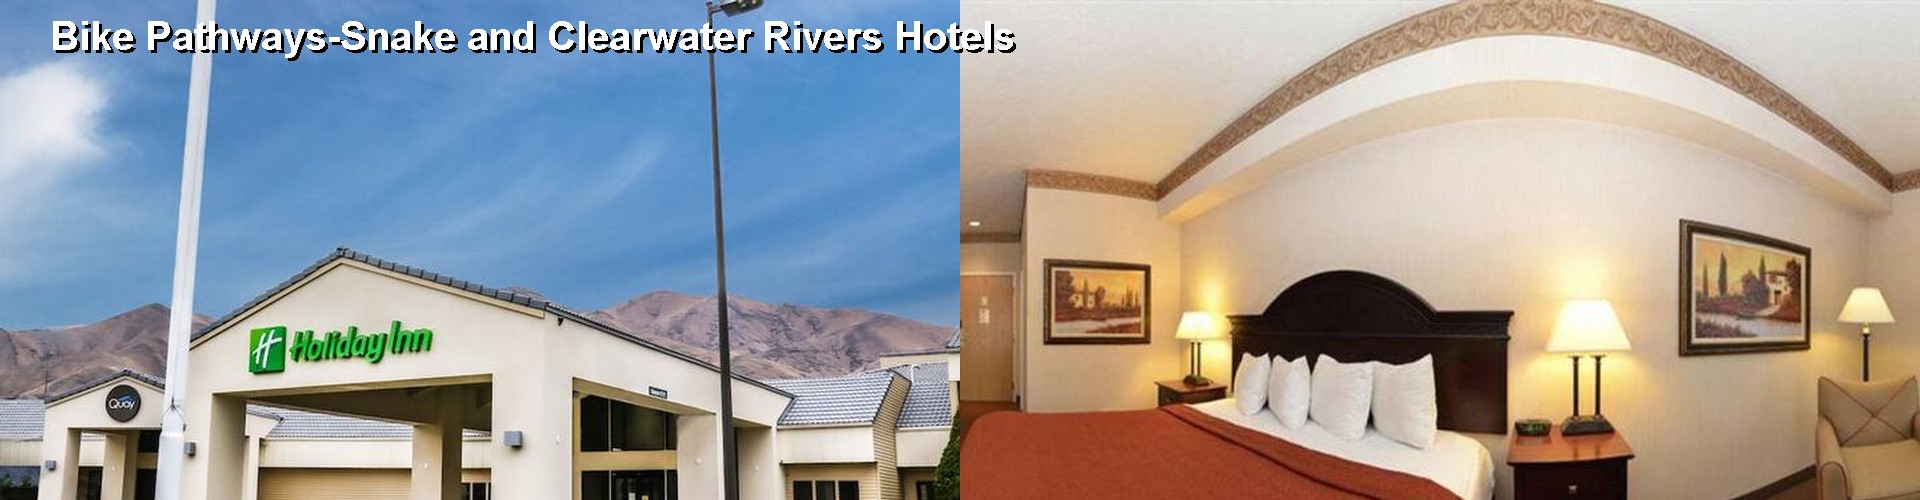 4 Best Hotels near Bike Pathways-Snake and Clearwater Rivers